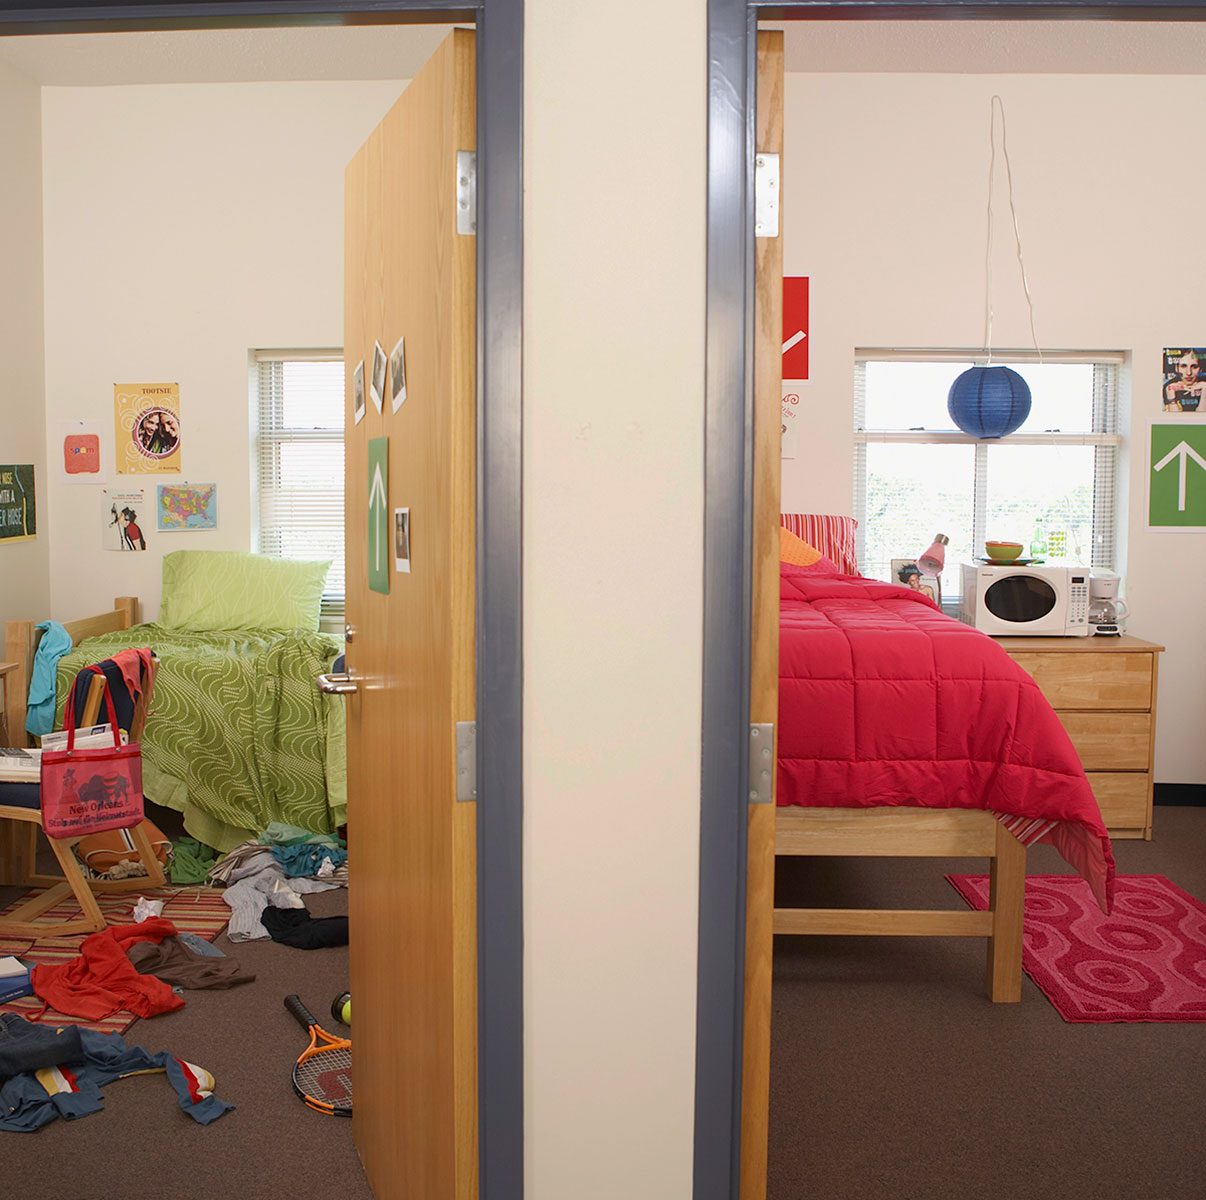 19 Dorm Room Tips That'll Get You Instantly Organized